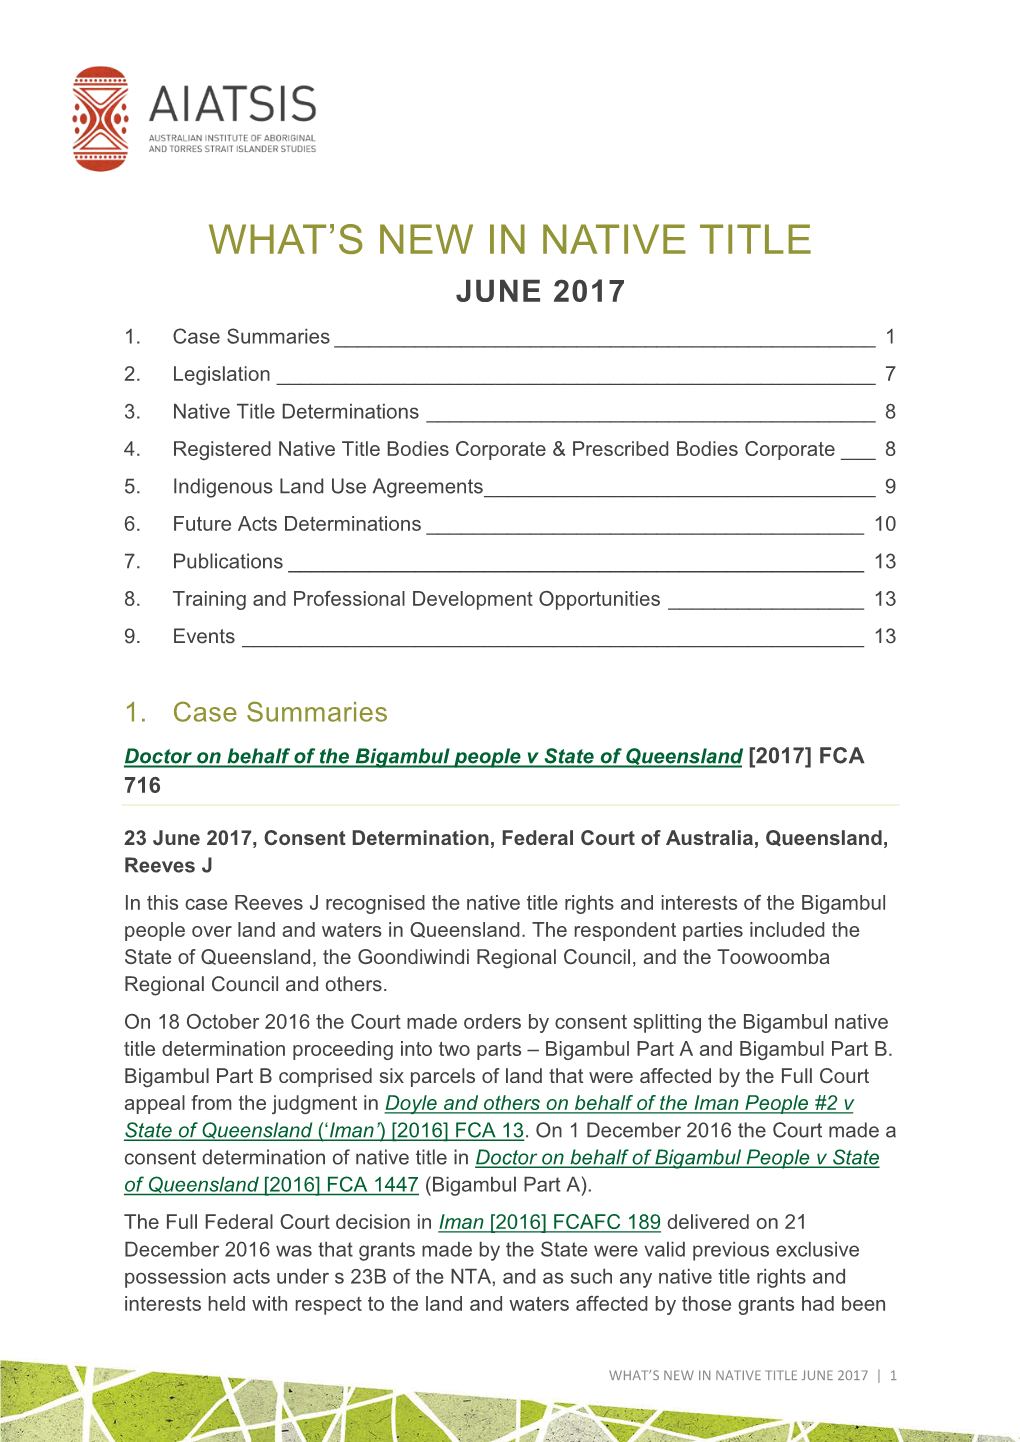 What's New in Native Title